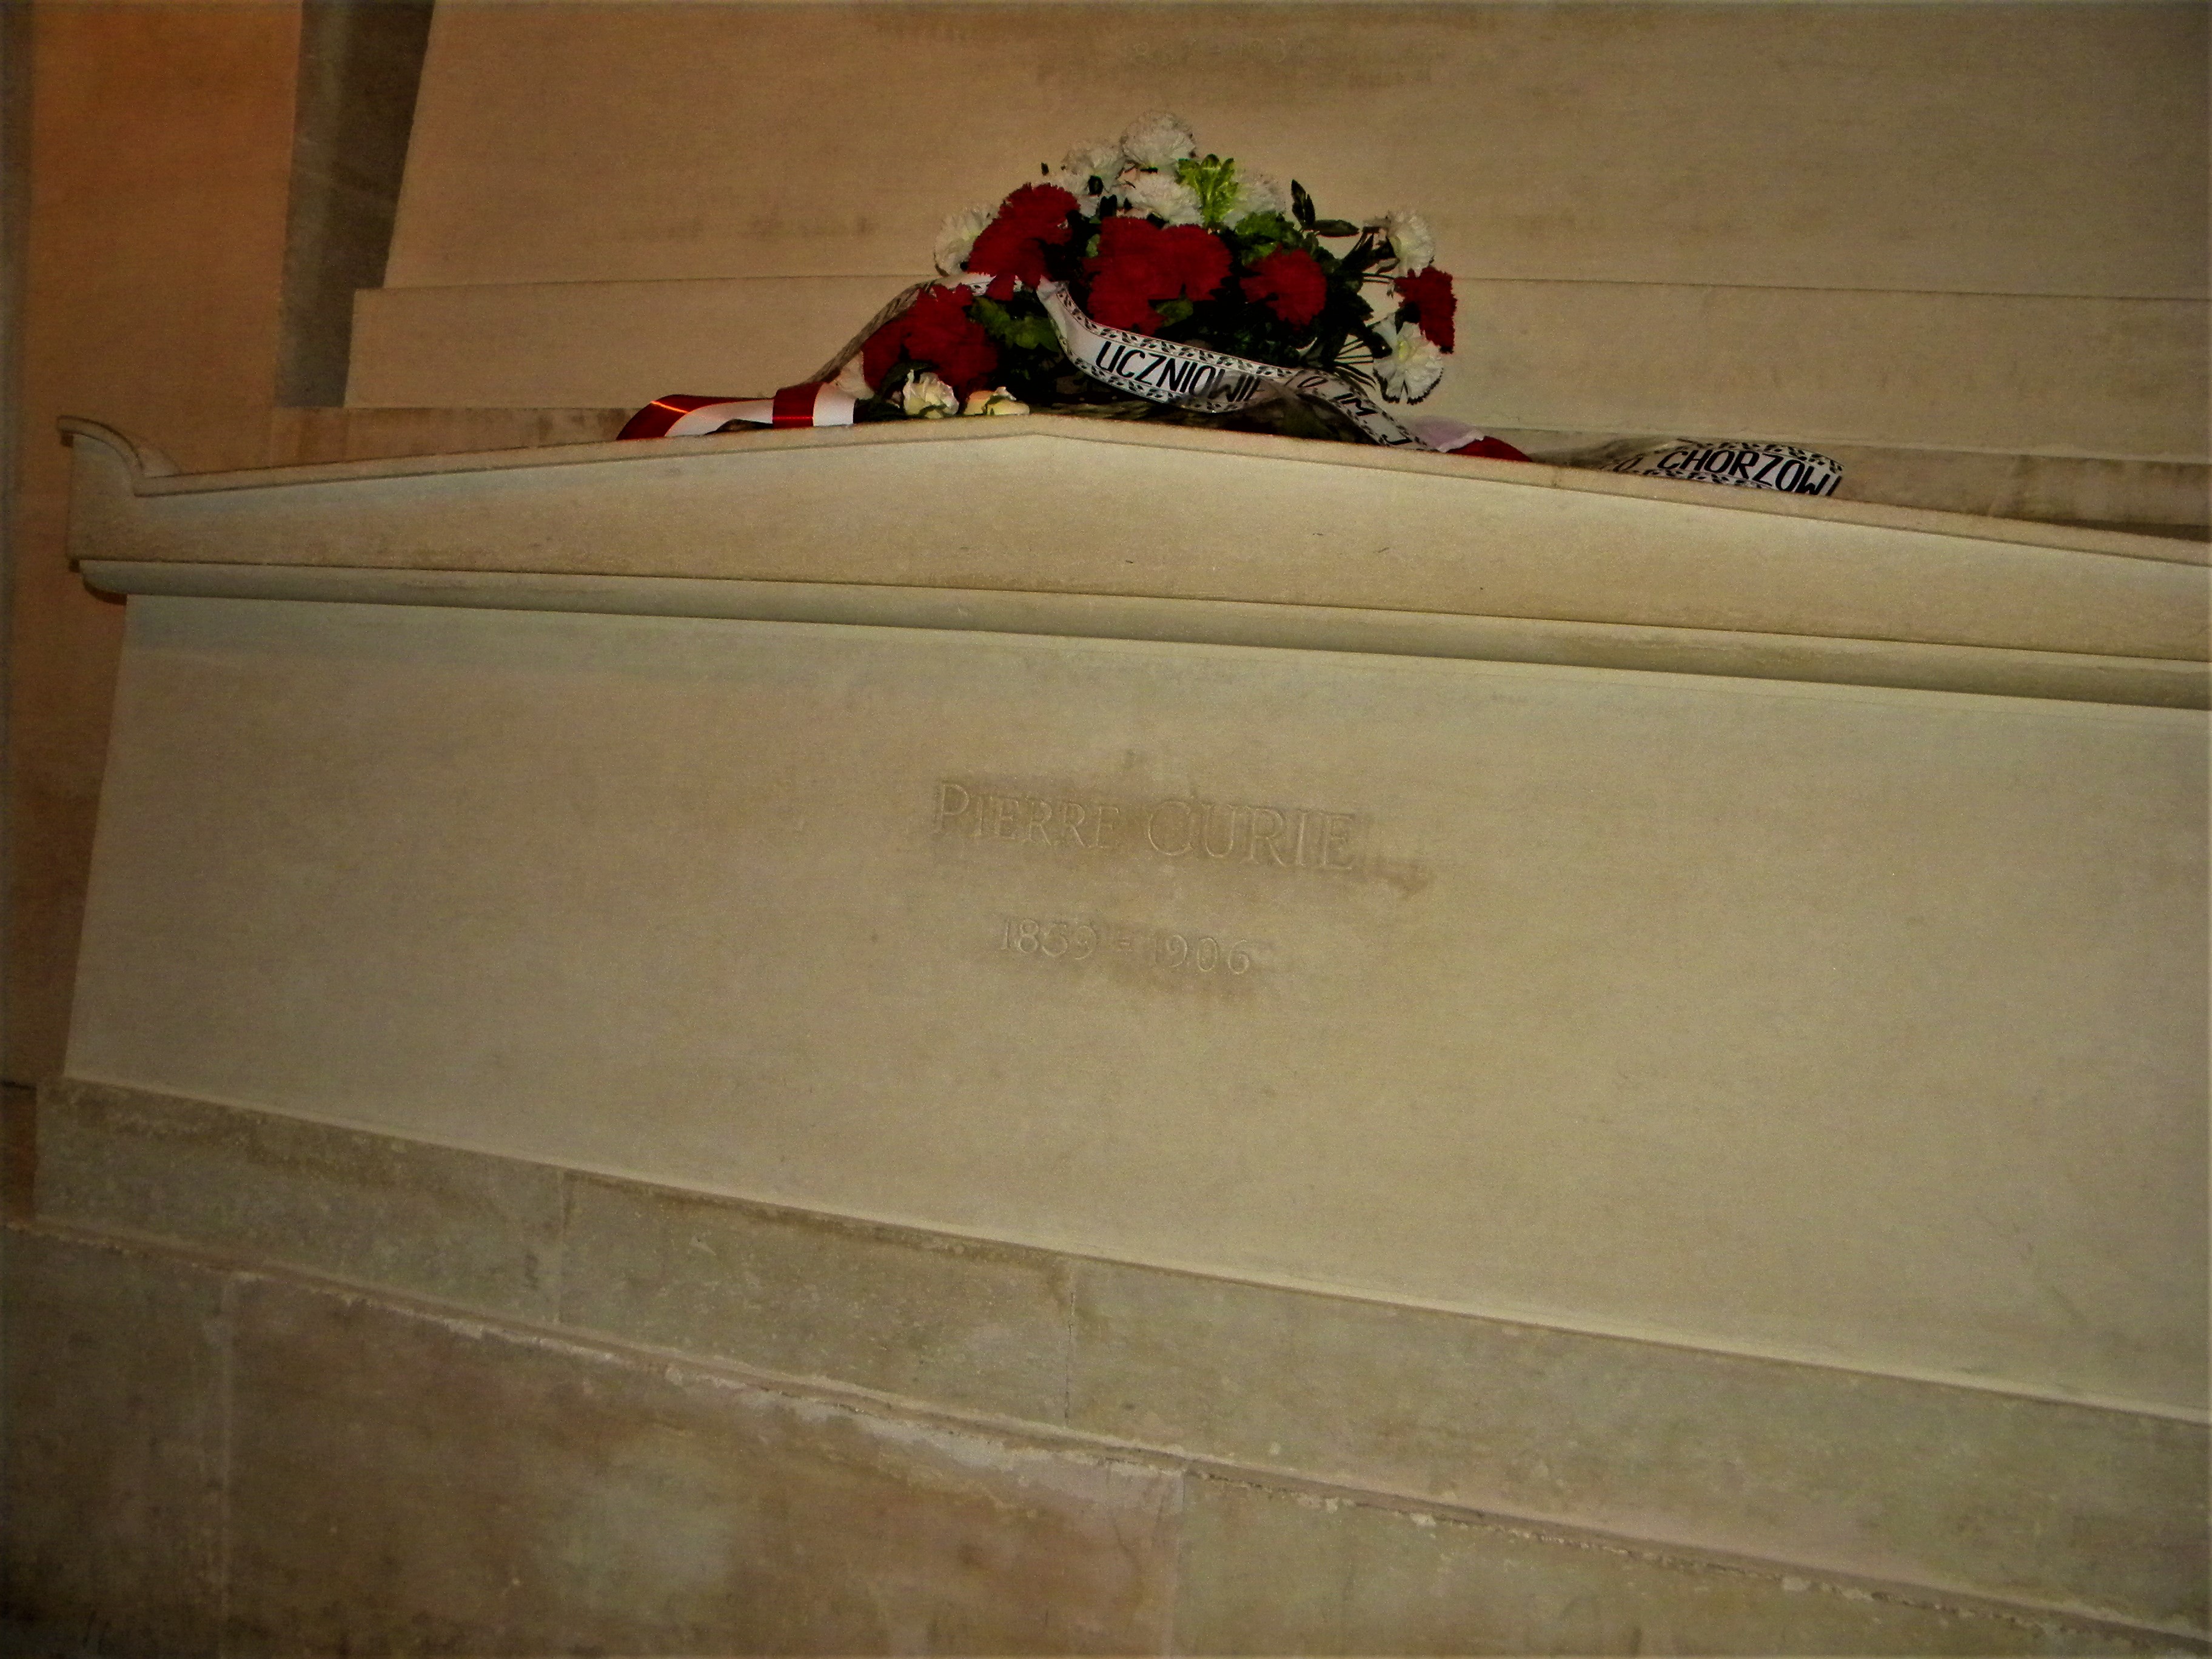 https://upload.wikimedia.org/wikipedia/commons/3/34/Paris_France._PANTHEON._The_tomb_of_Pierre_CURIE_%28PA00088420%29.jpg